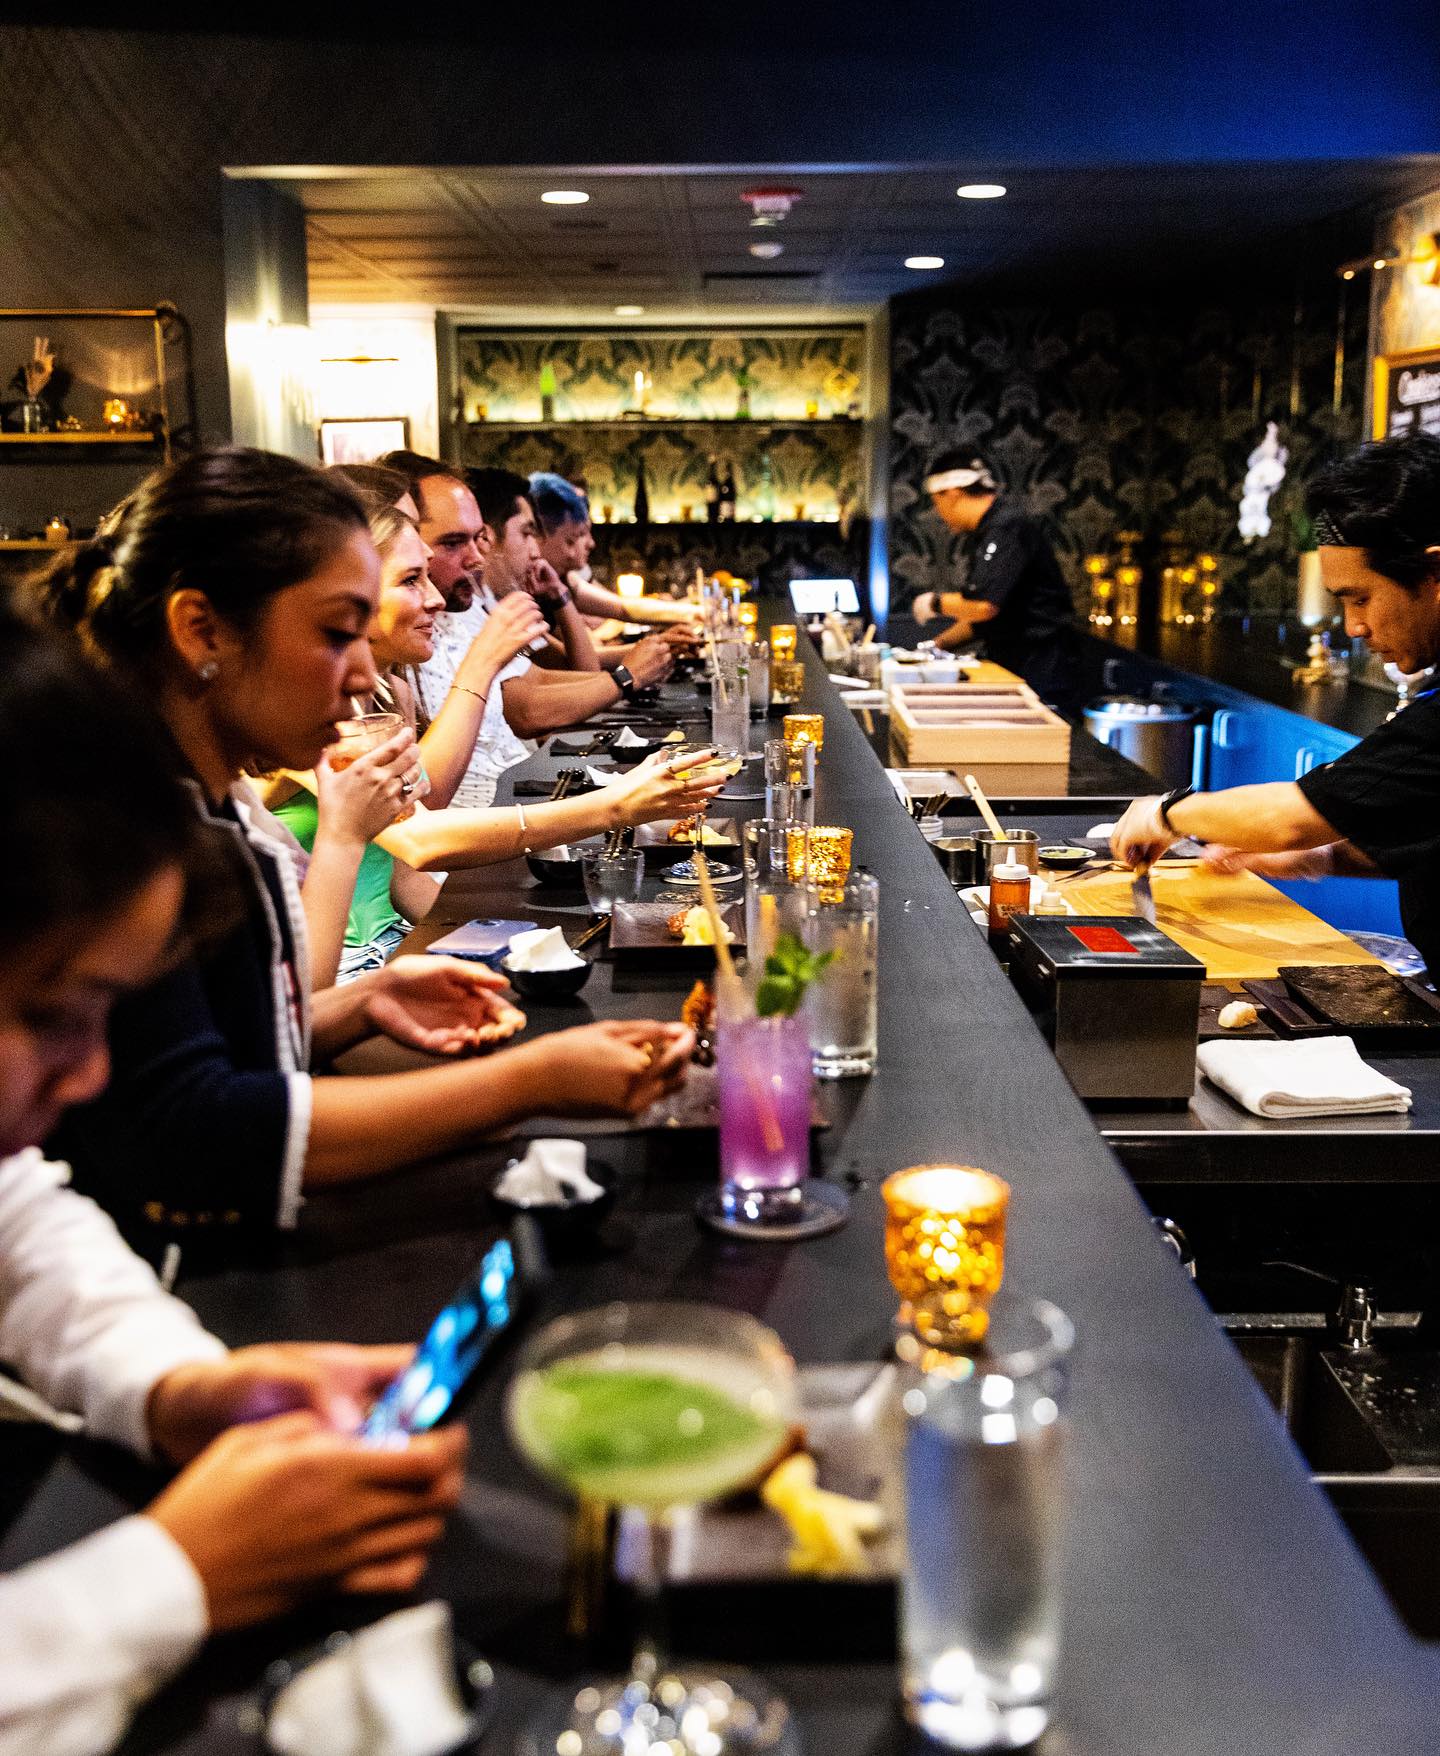 Row of people at left dine on sushi and people at right preparing food